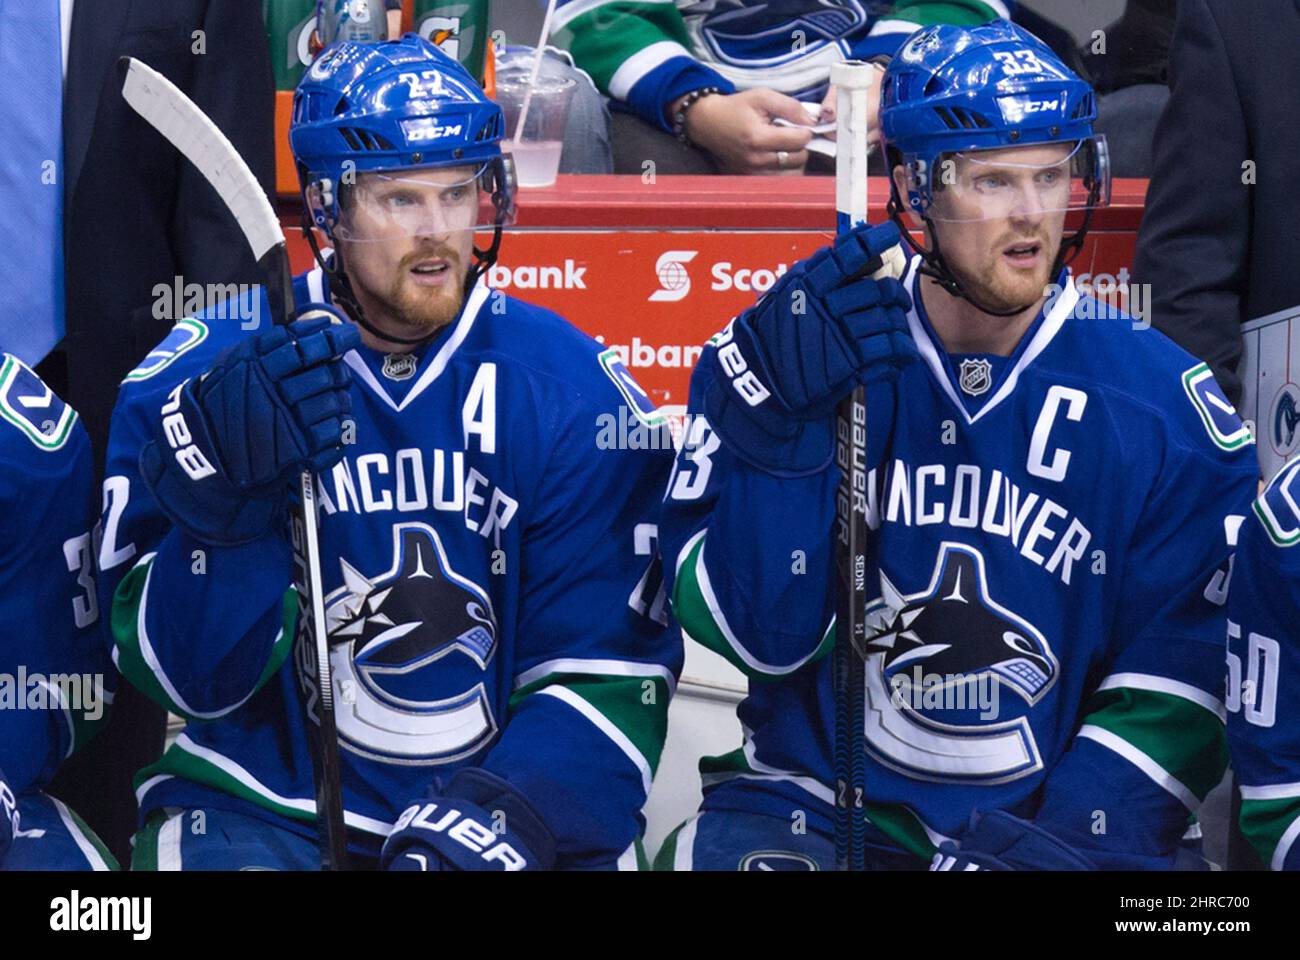 Vancouver Canucks Daniel Sedin, left, and his twin brother Henrik Sedin sit on the bench during the third period of an NHL hockey game against the Los Angeles Kings in Vancouver on